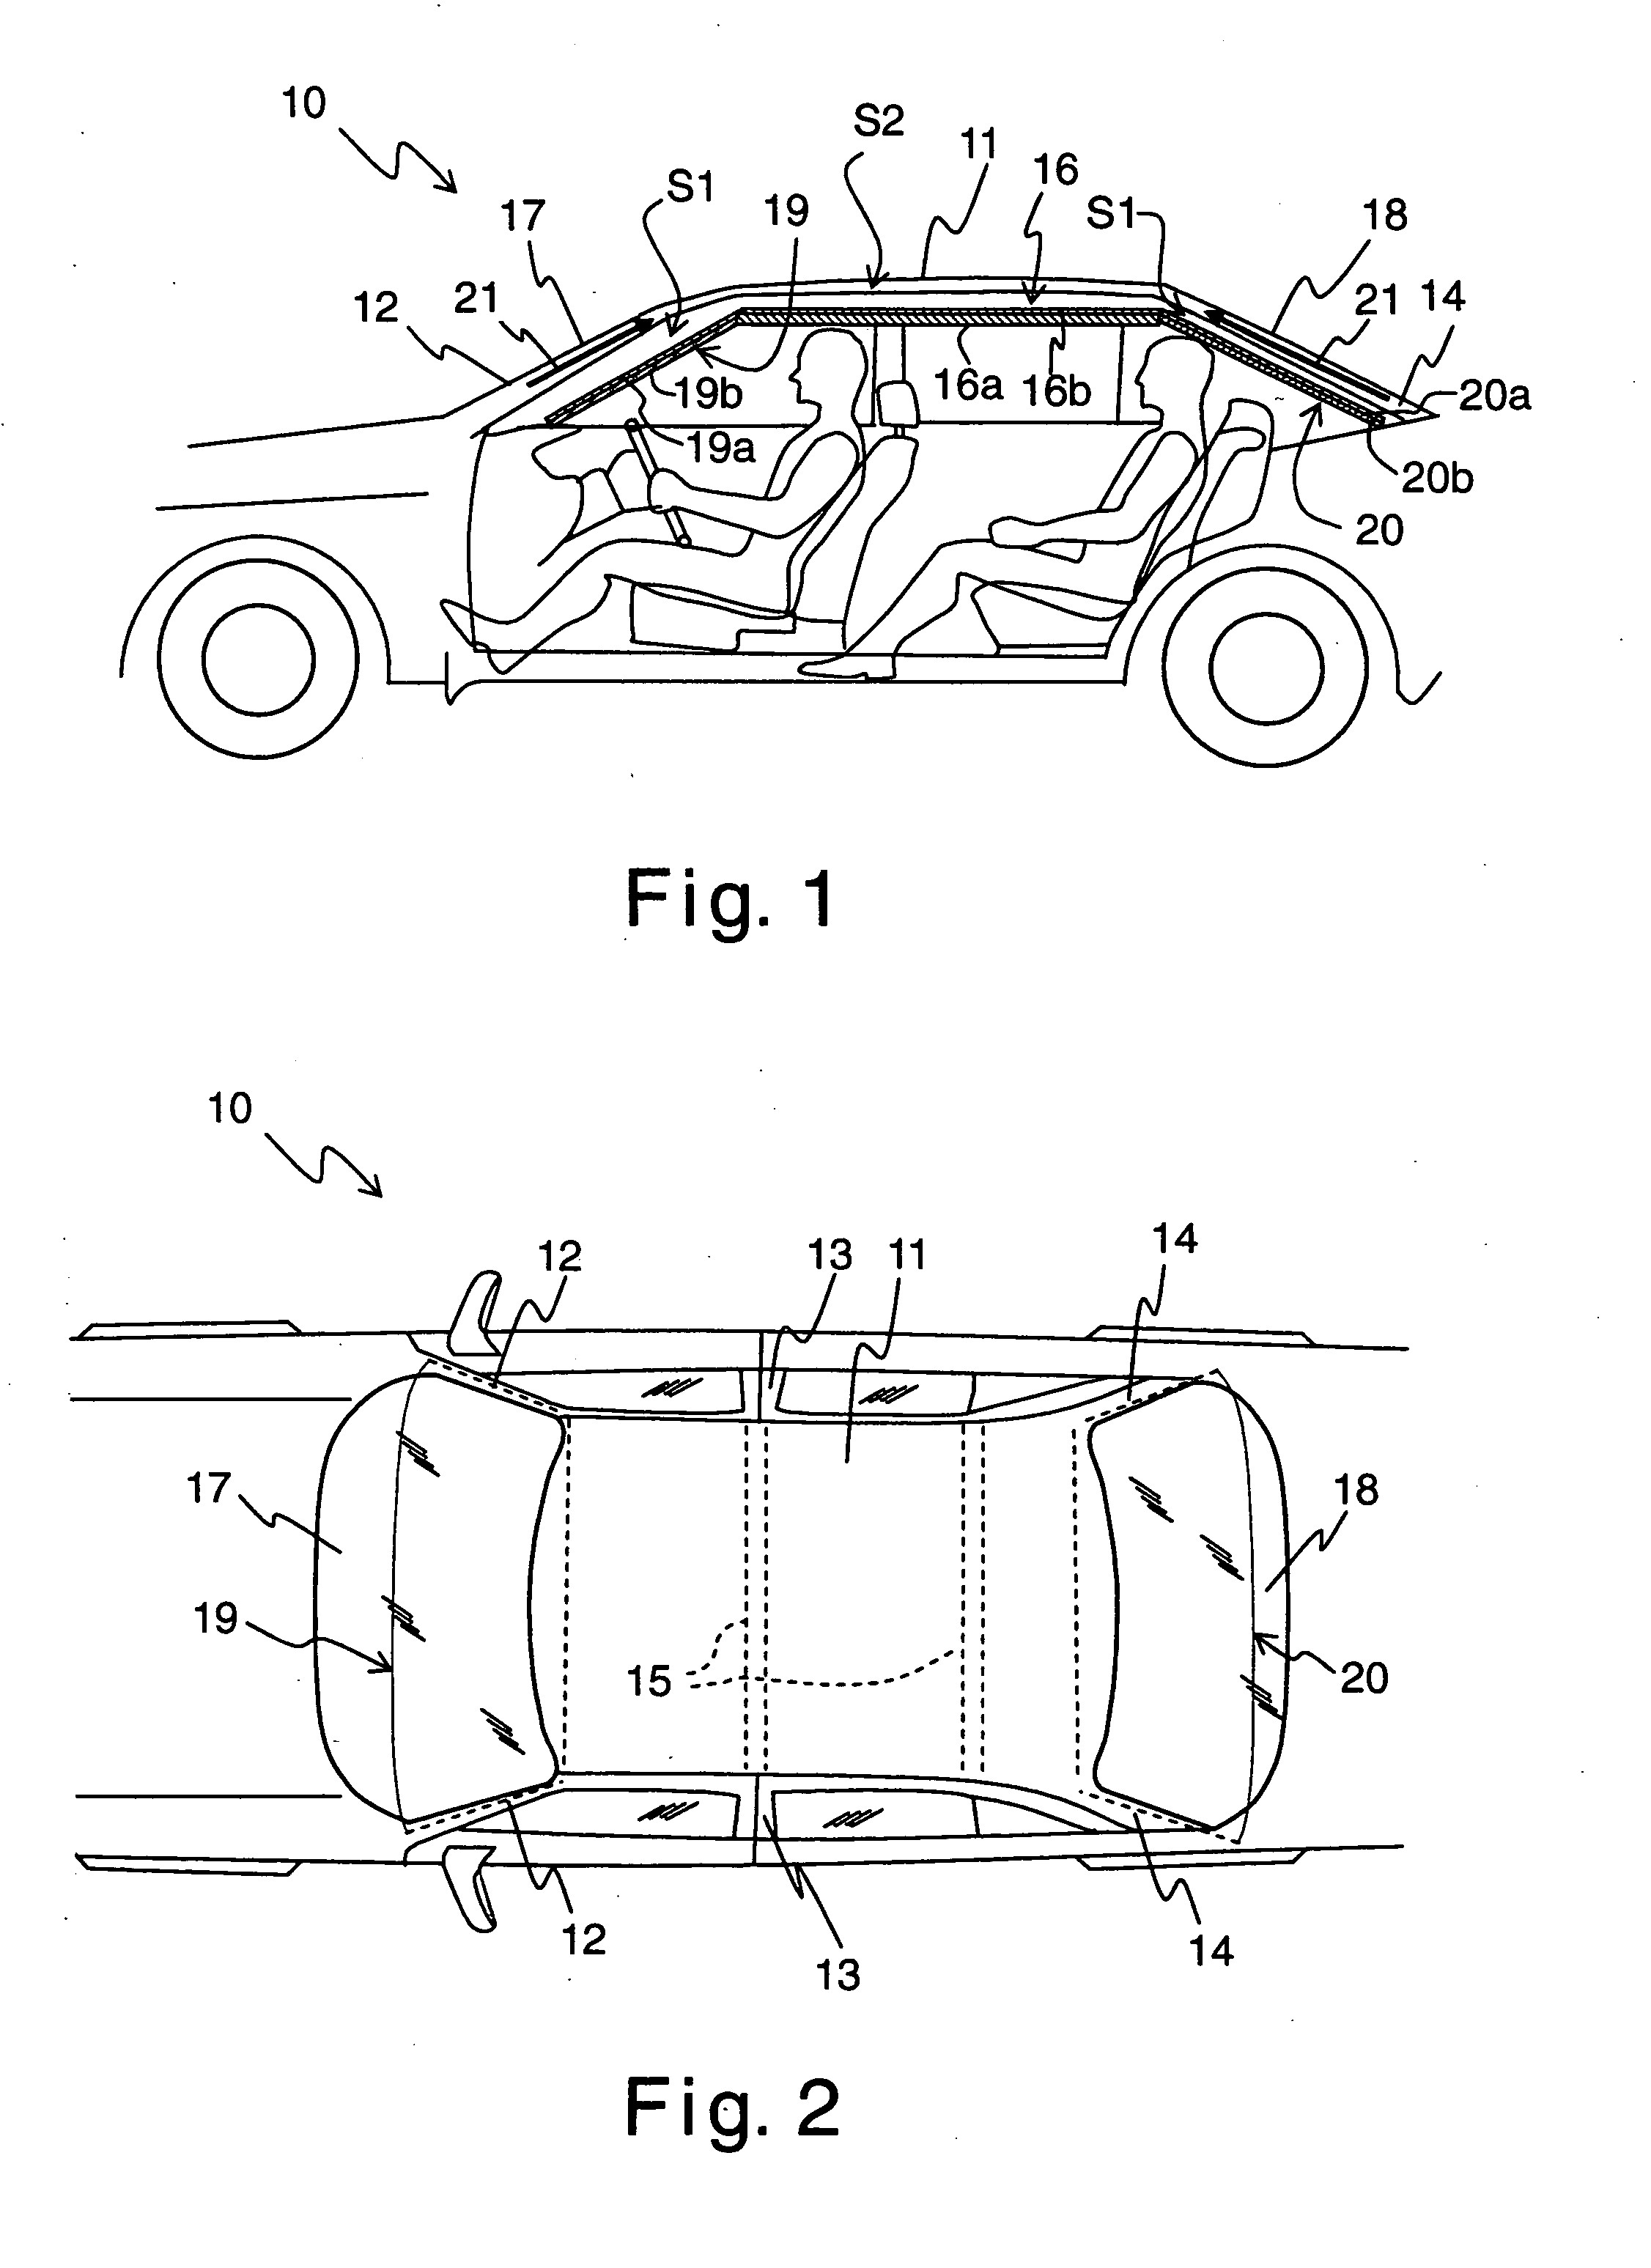 Vehicle body structure with heat radiation insulating arrangement